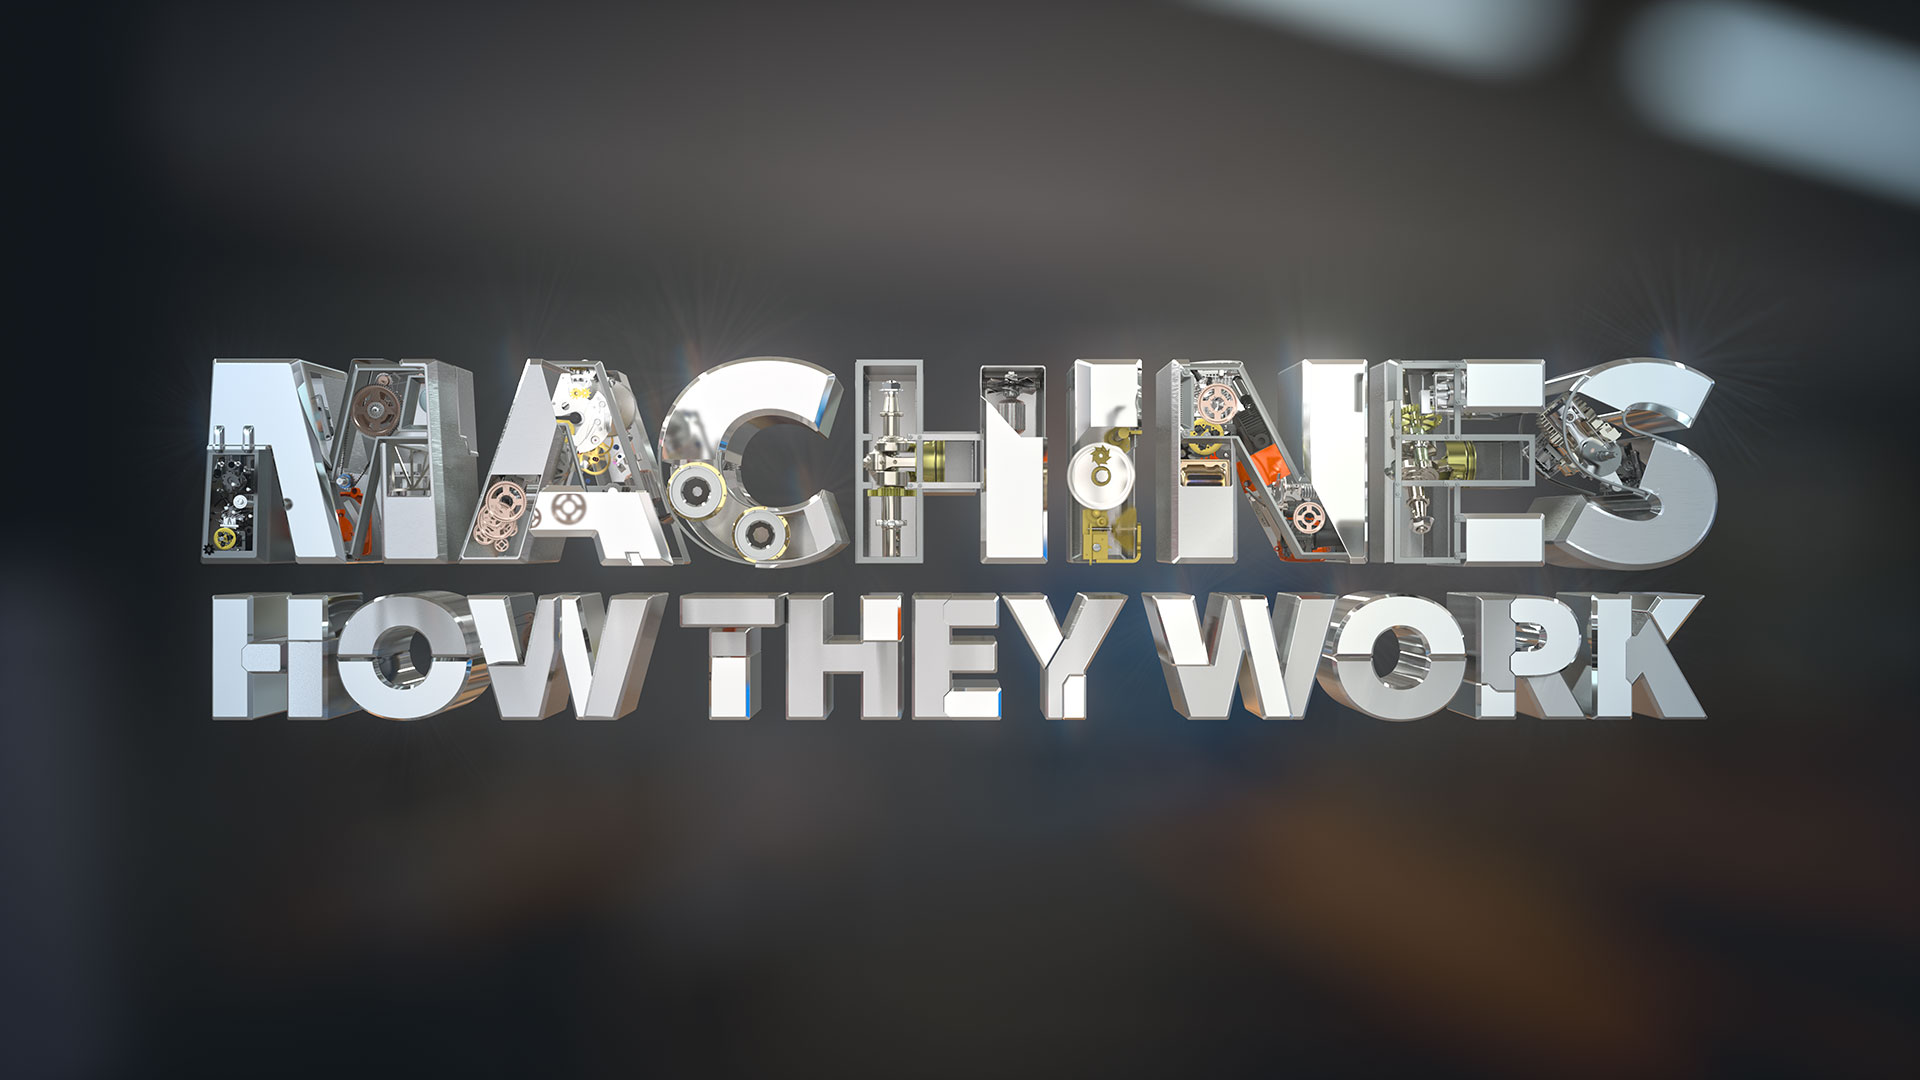 Digital Dimension allies with UK studio Windfall Films on the production of the series MACHINES:  HOW THEY WORK